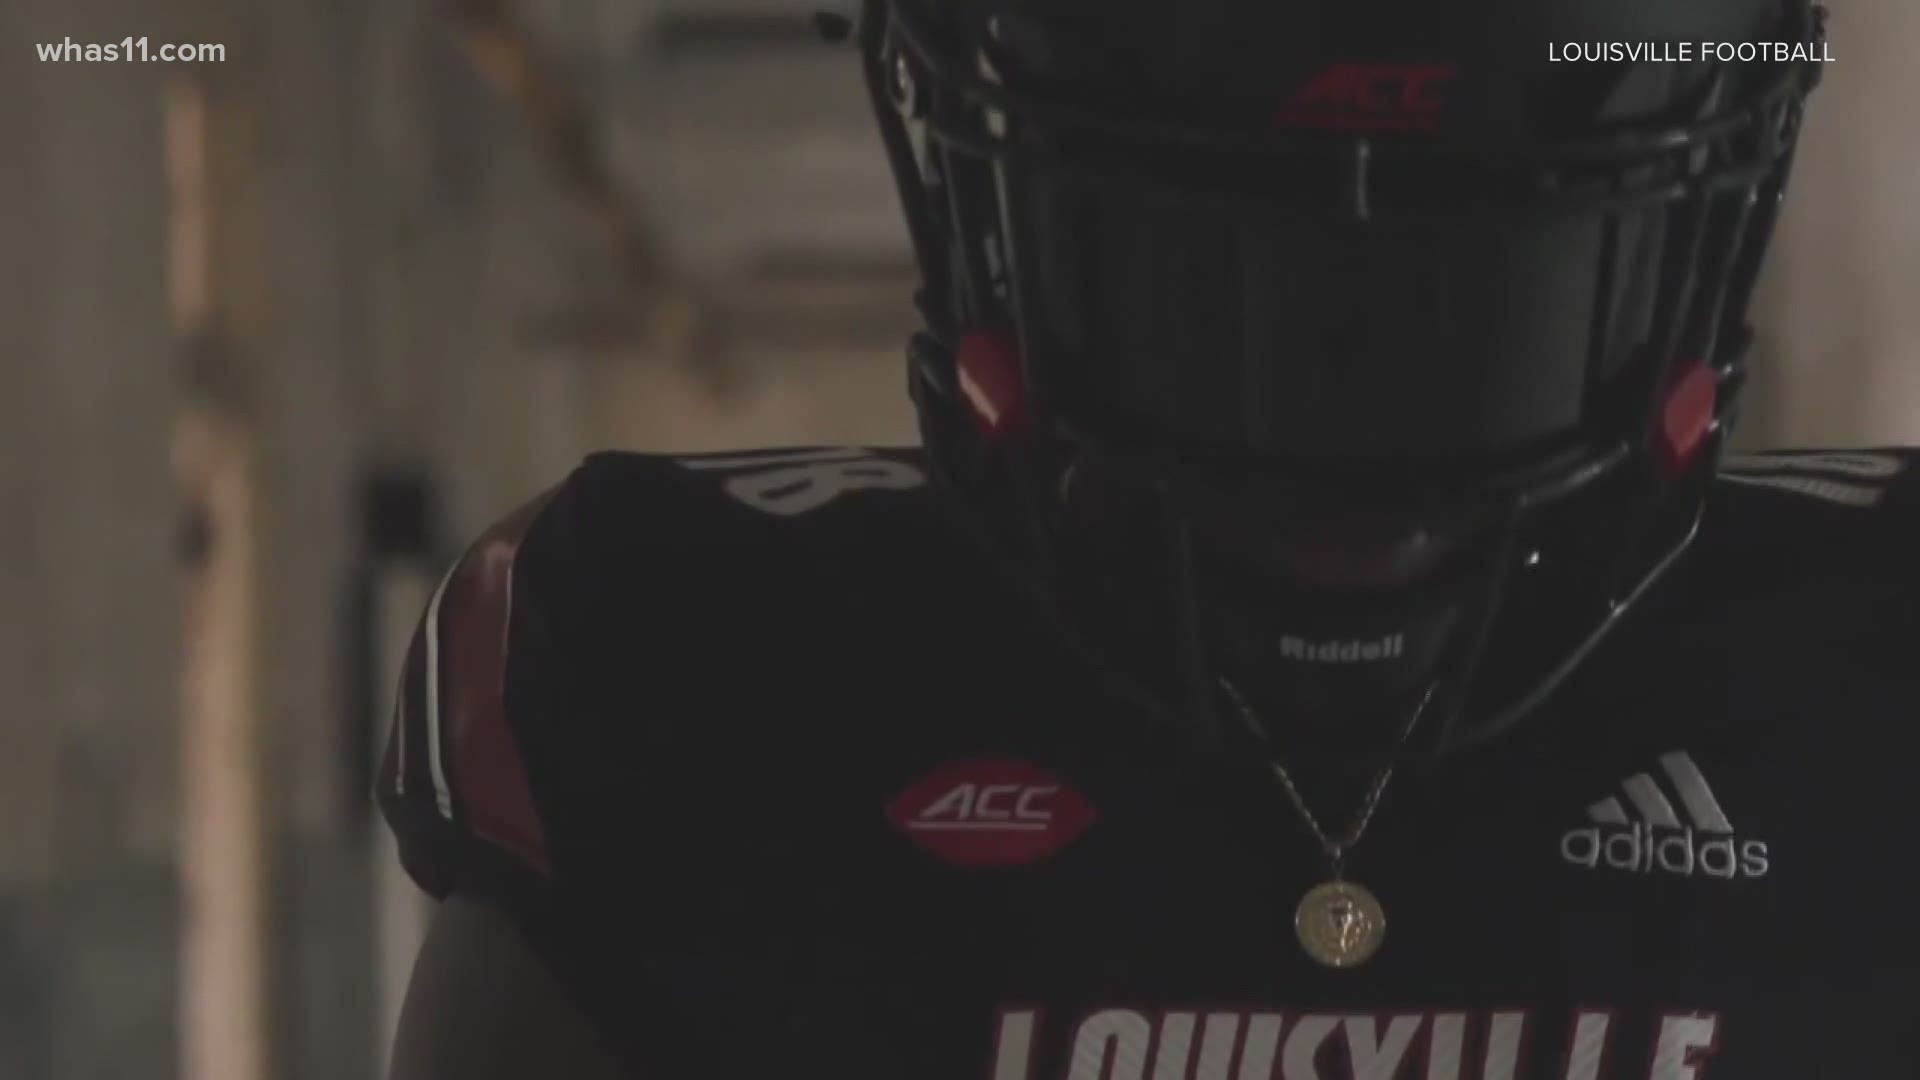 The Louisville Cardinals are hosting a blackout game on Saturday to celebrate Halloween.